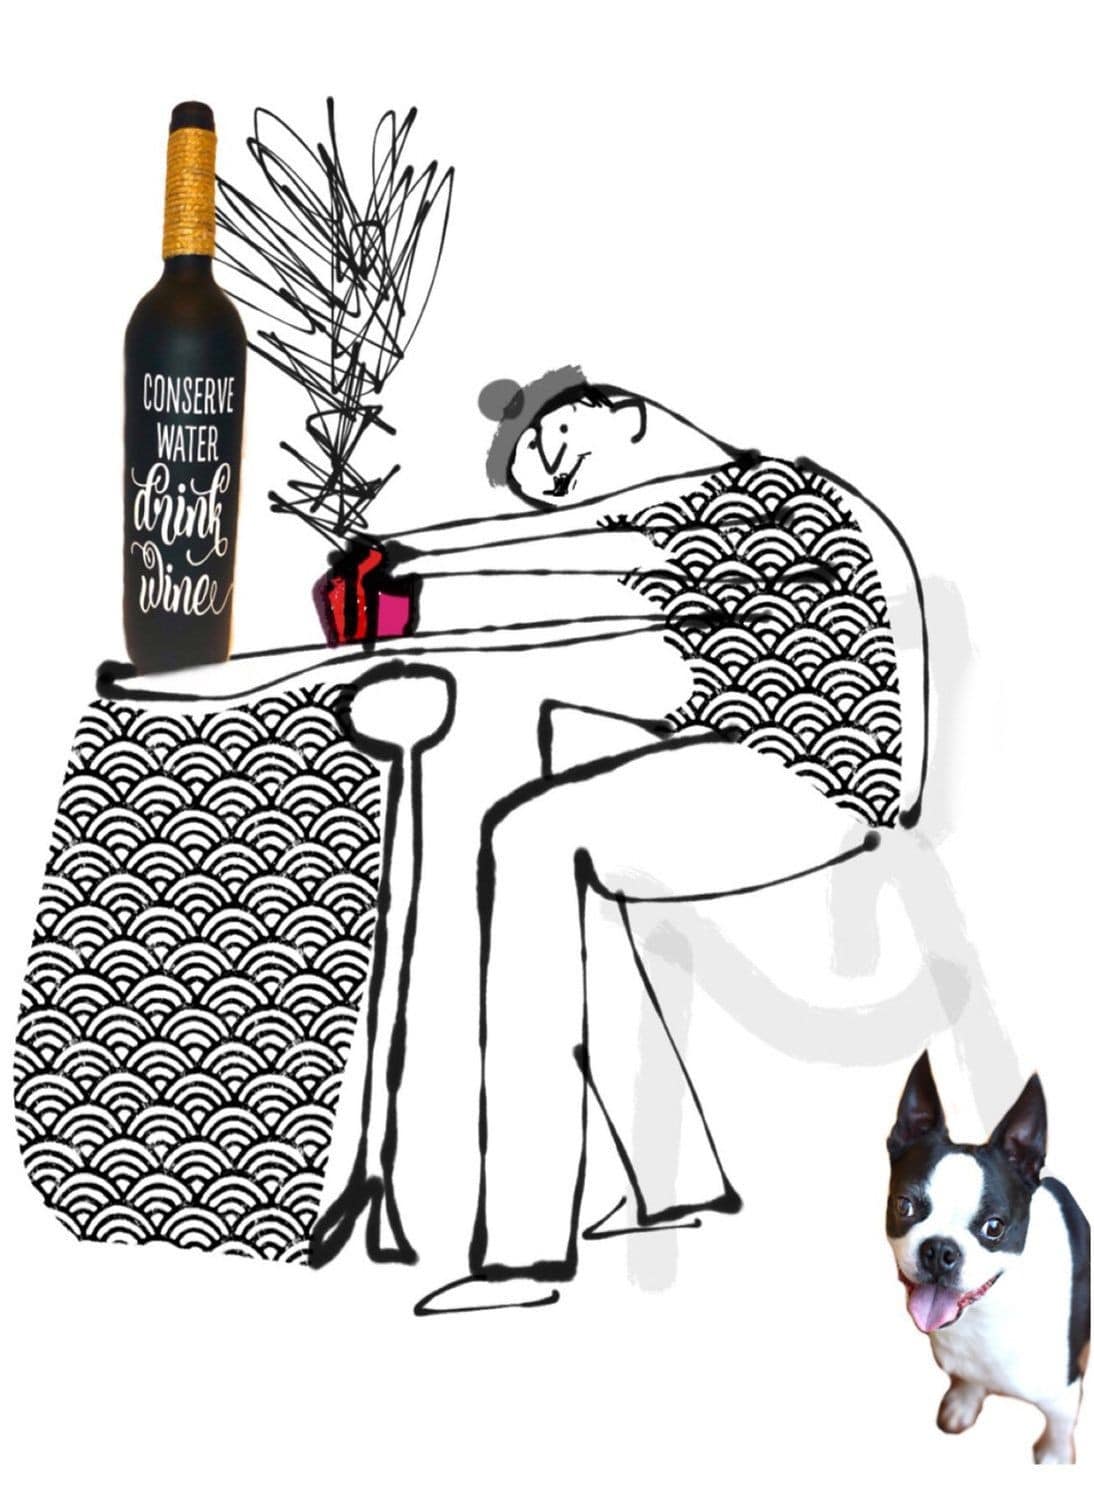 Art Illustration Of A Man With A Bottle And A Dog